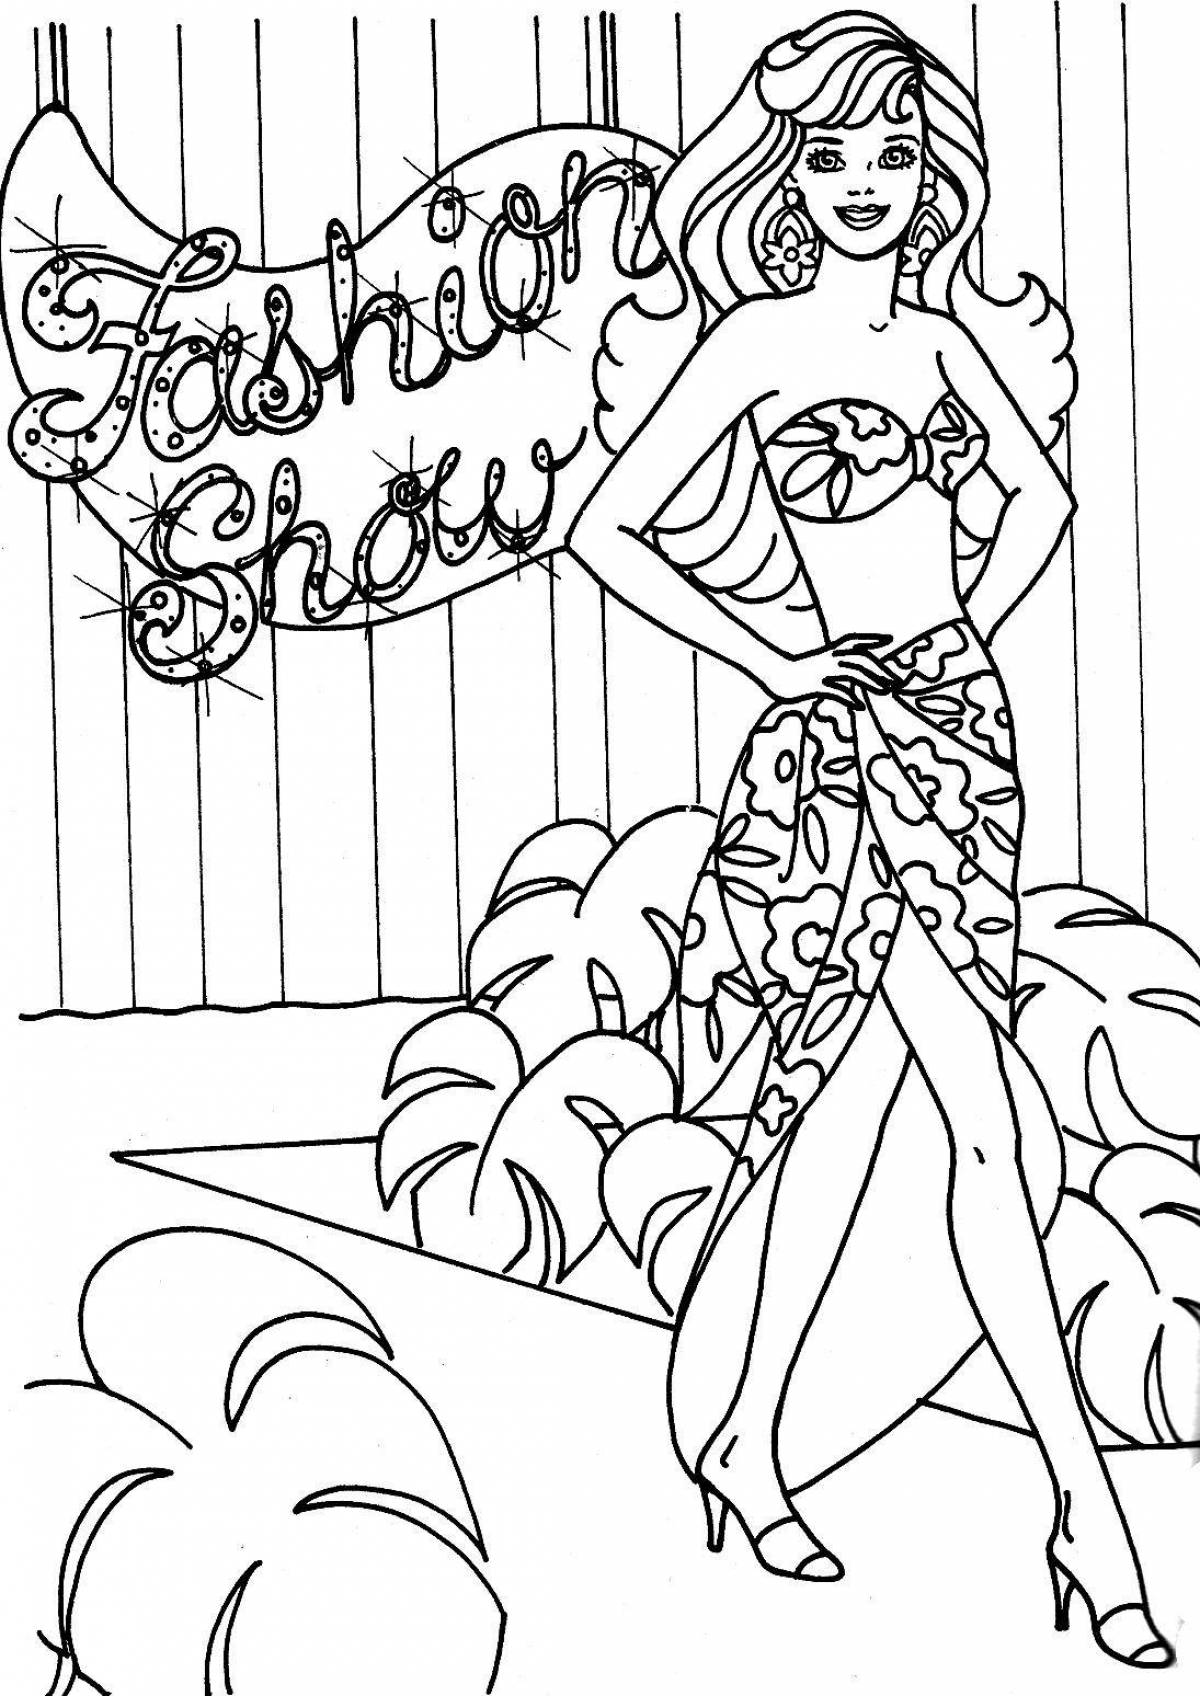 Coloring book funny barbie 90s